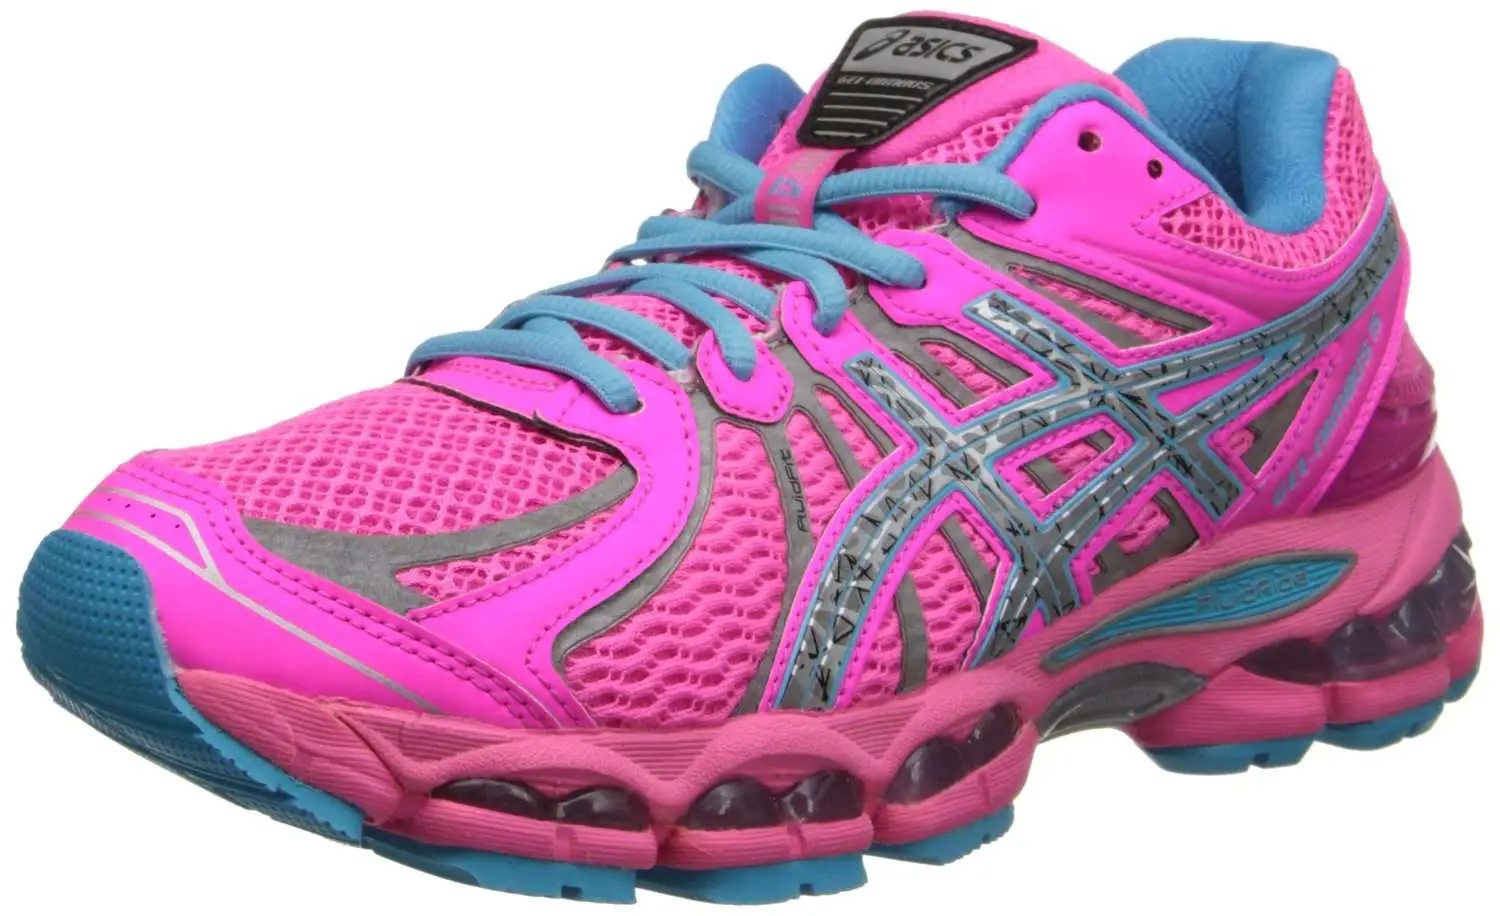 Best Running Shoes For Supination Women: Lightweight and ...